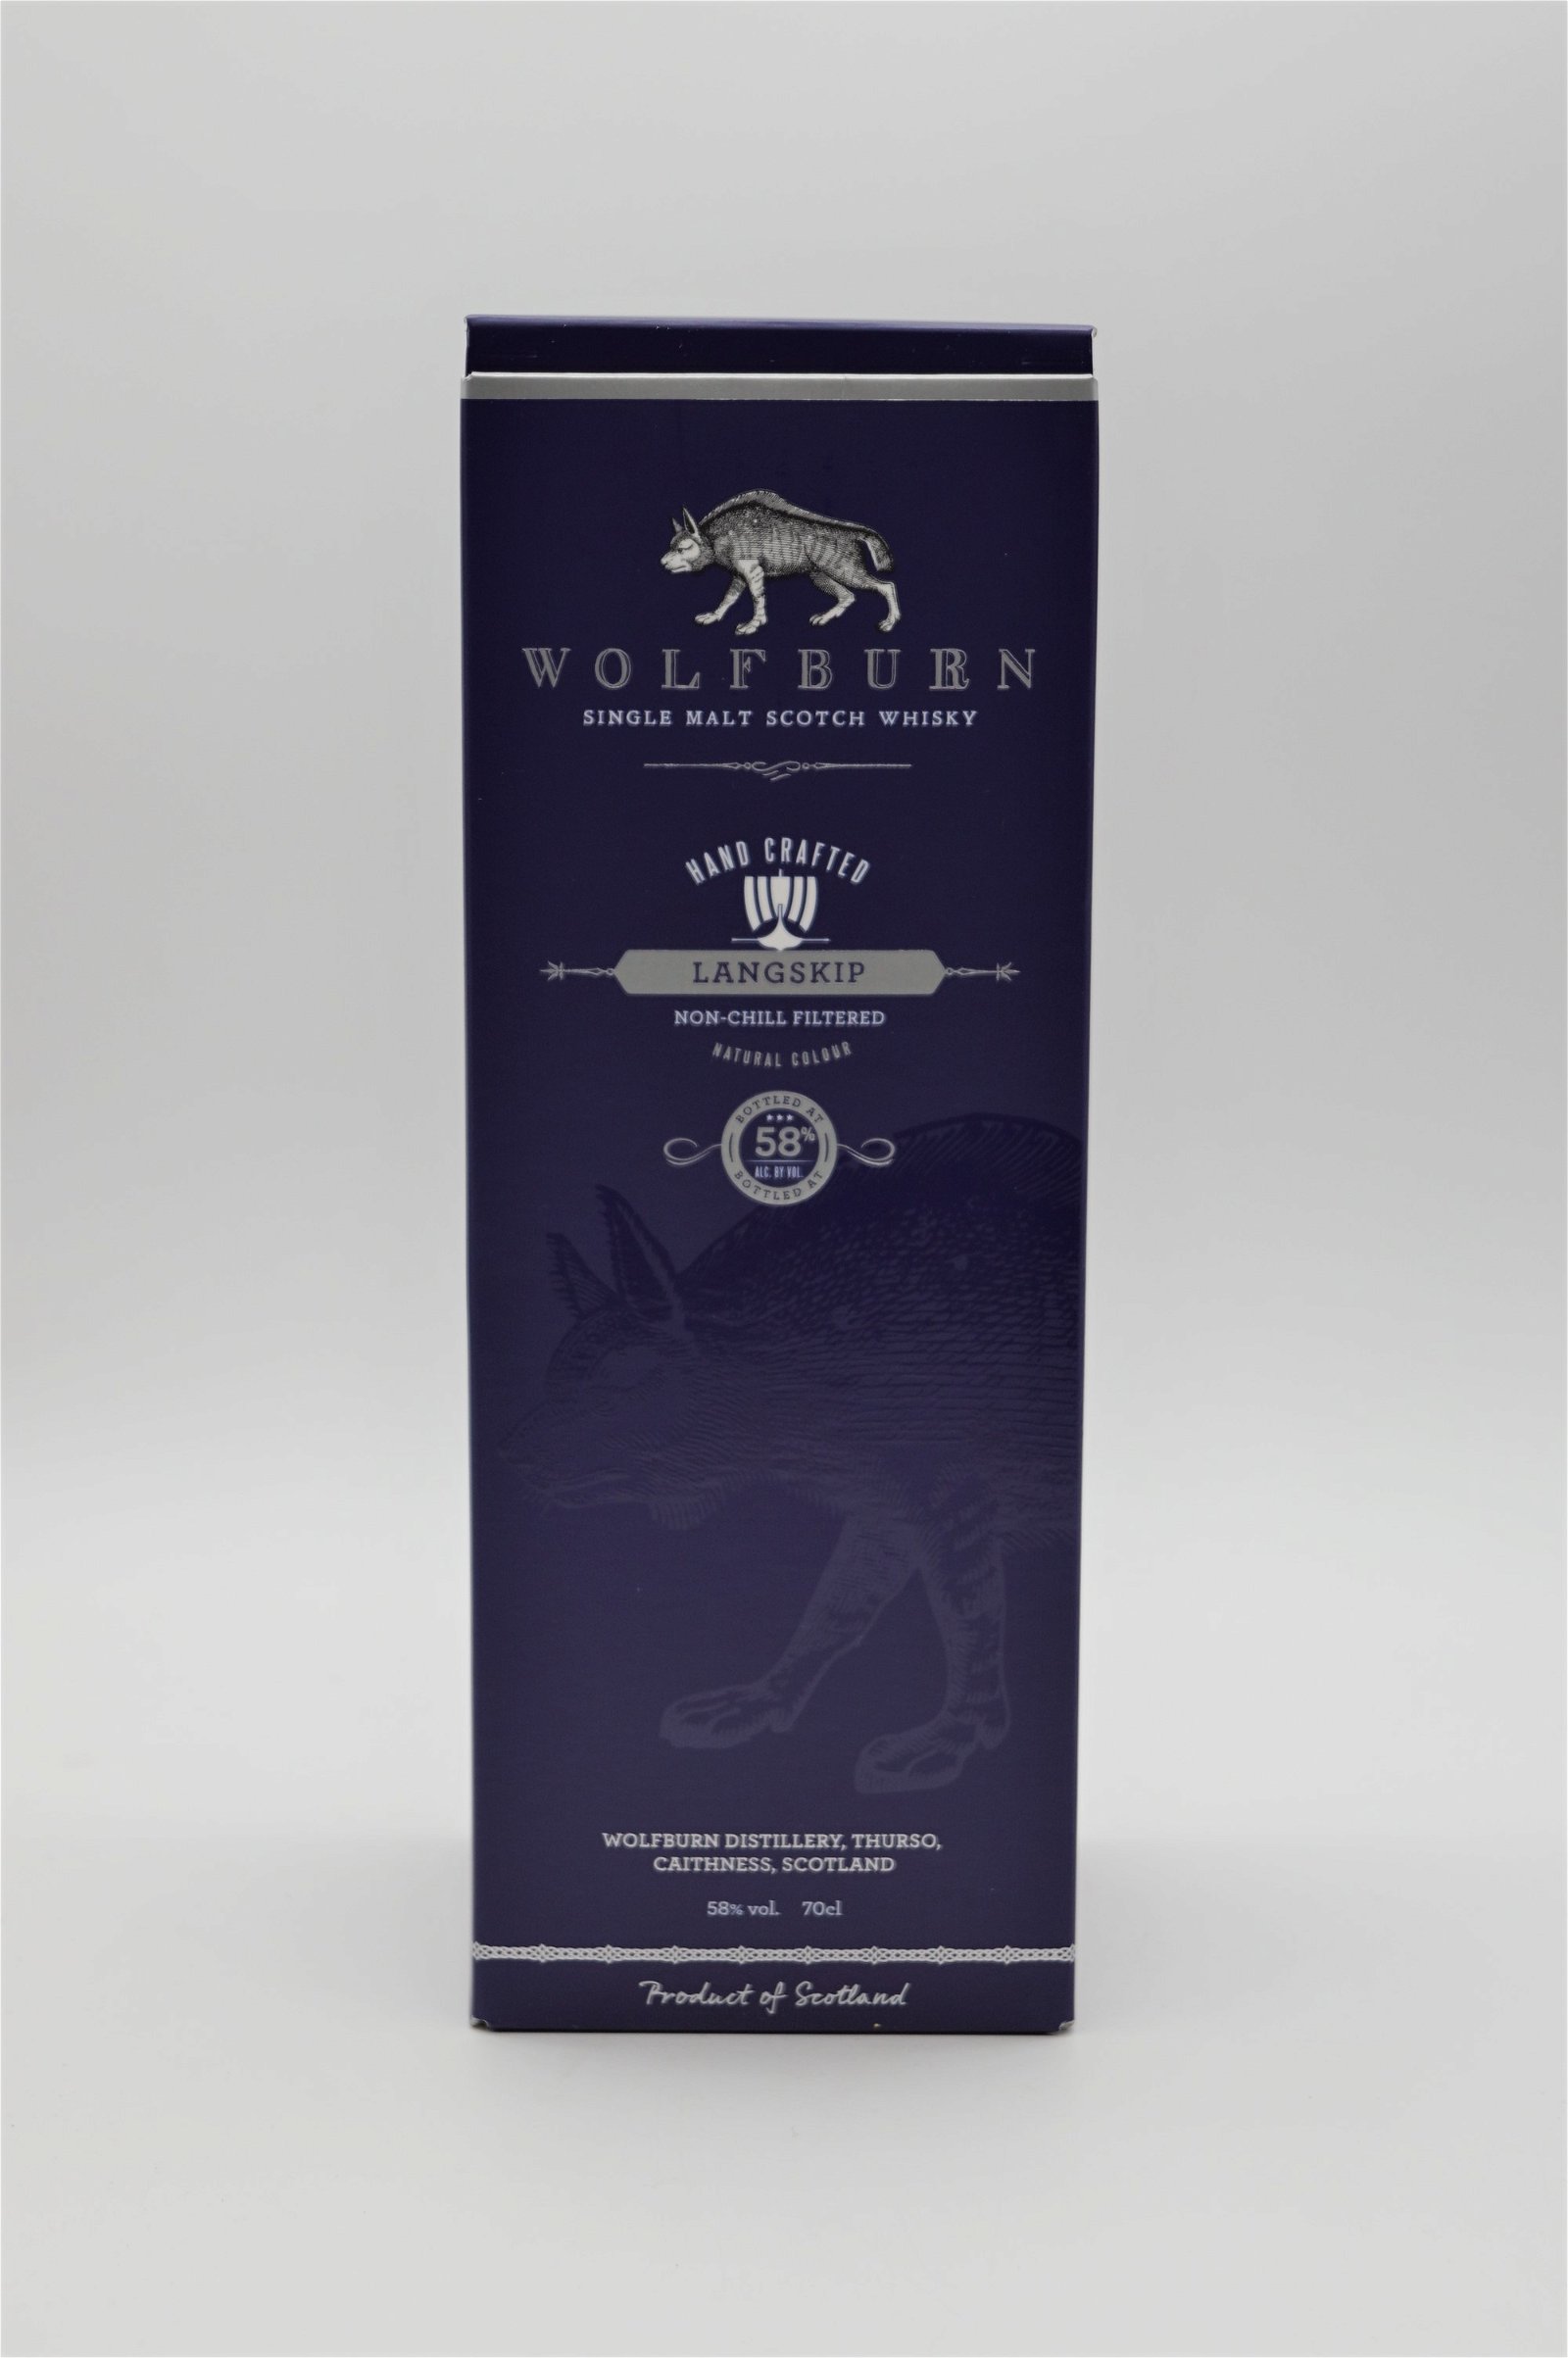 Wolfburn Langskip Hand Crafted non Chill Filtered Single Malt Scotch Whisky